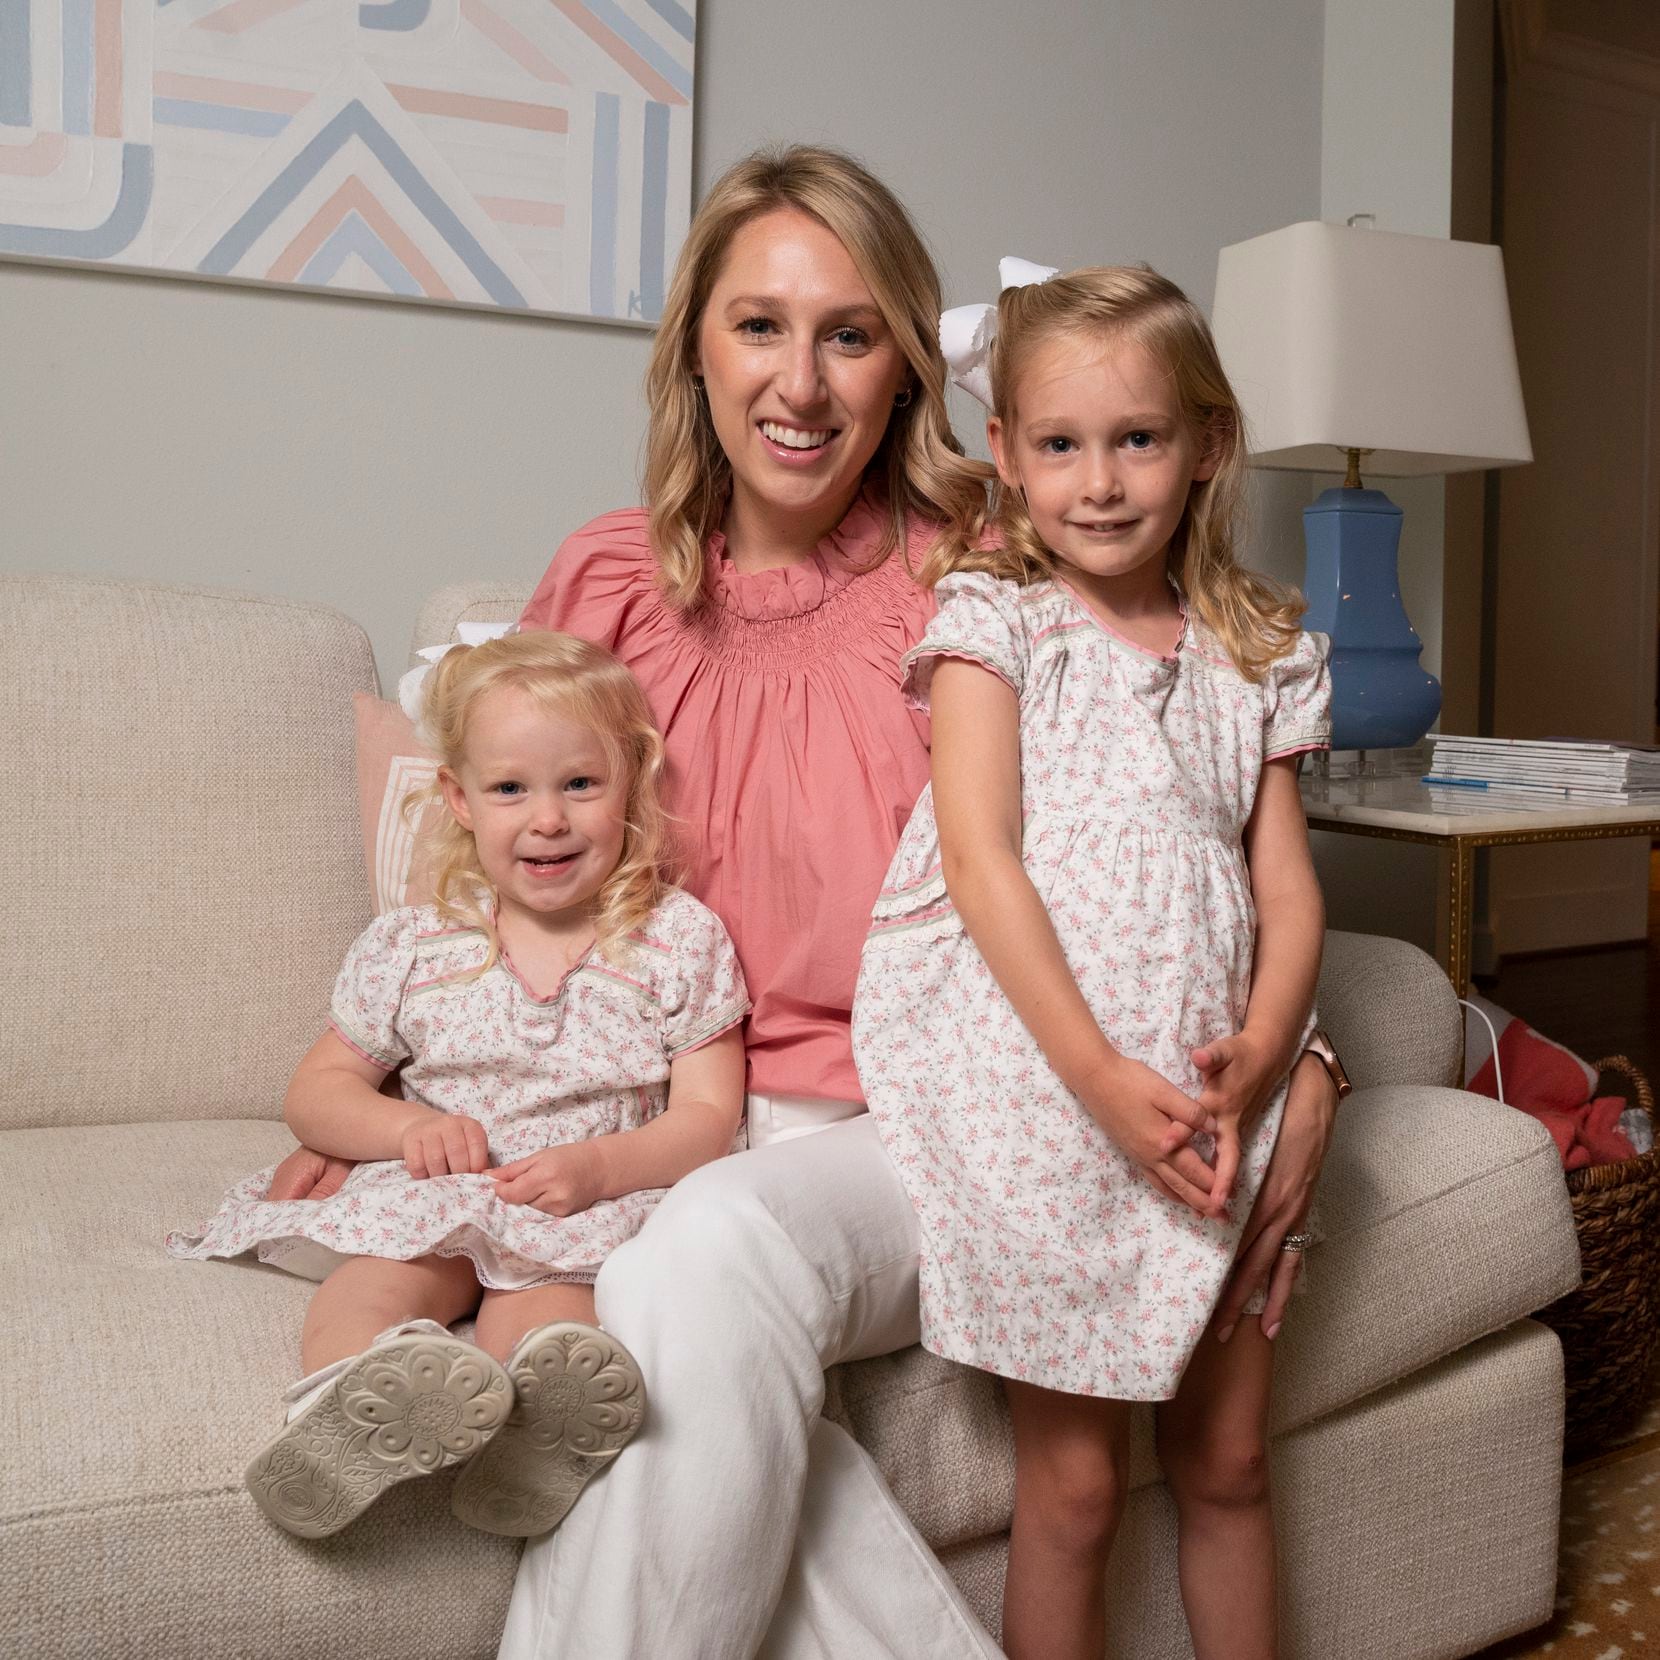 Lauren Schwalb says her company's name, Ohla! Foods, represents her family -- daughters Olivia, 4, and Hadley, 2, and her. Her husband represents the exclamation point in the brand's name. 